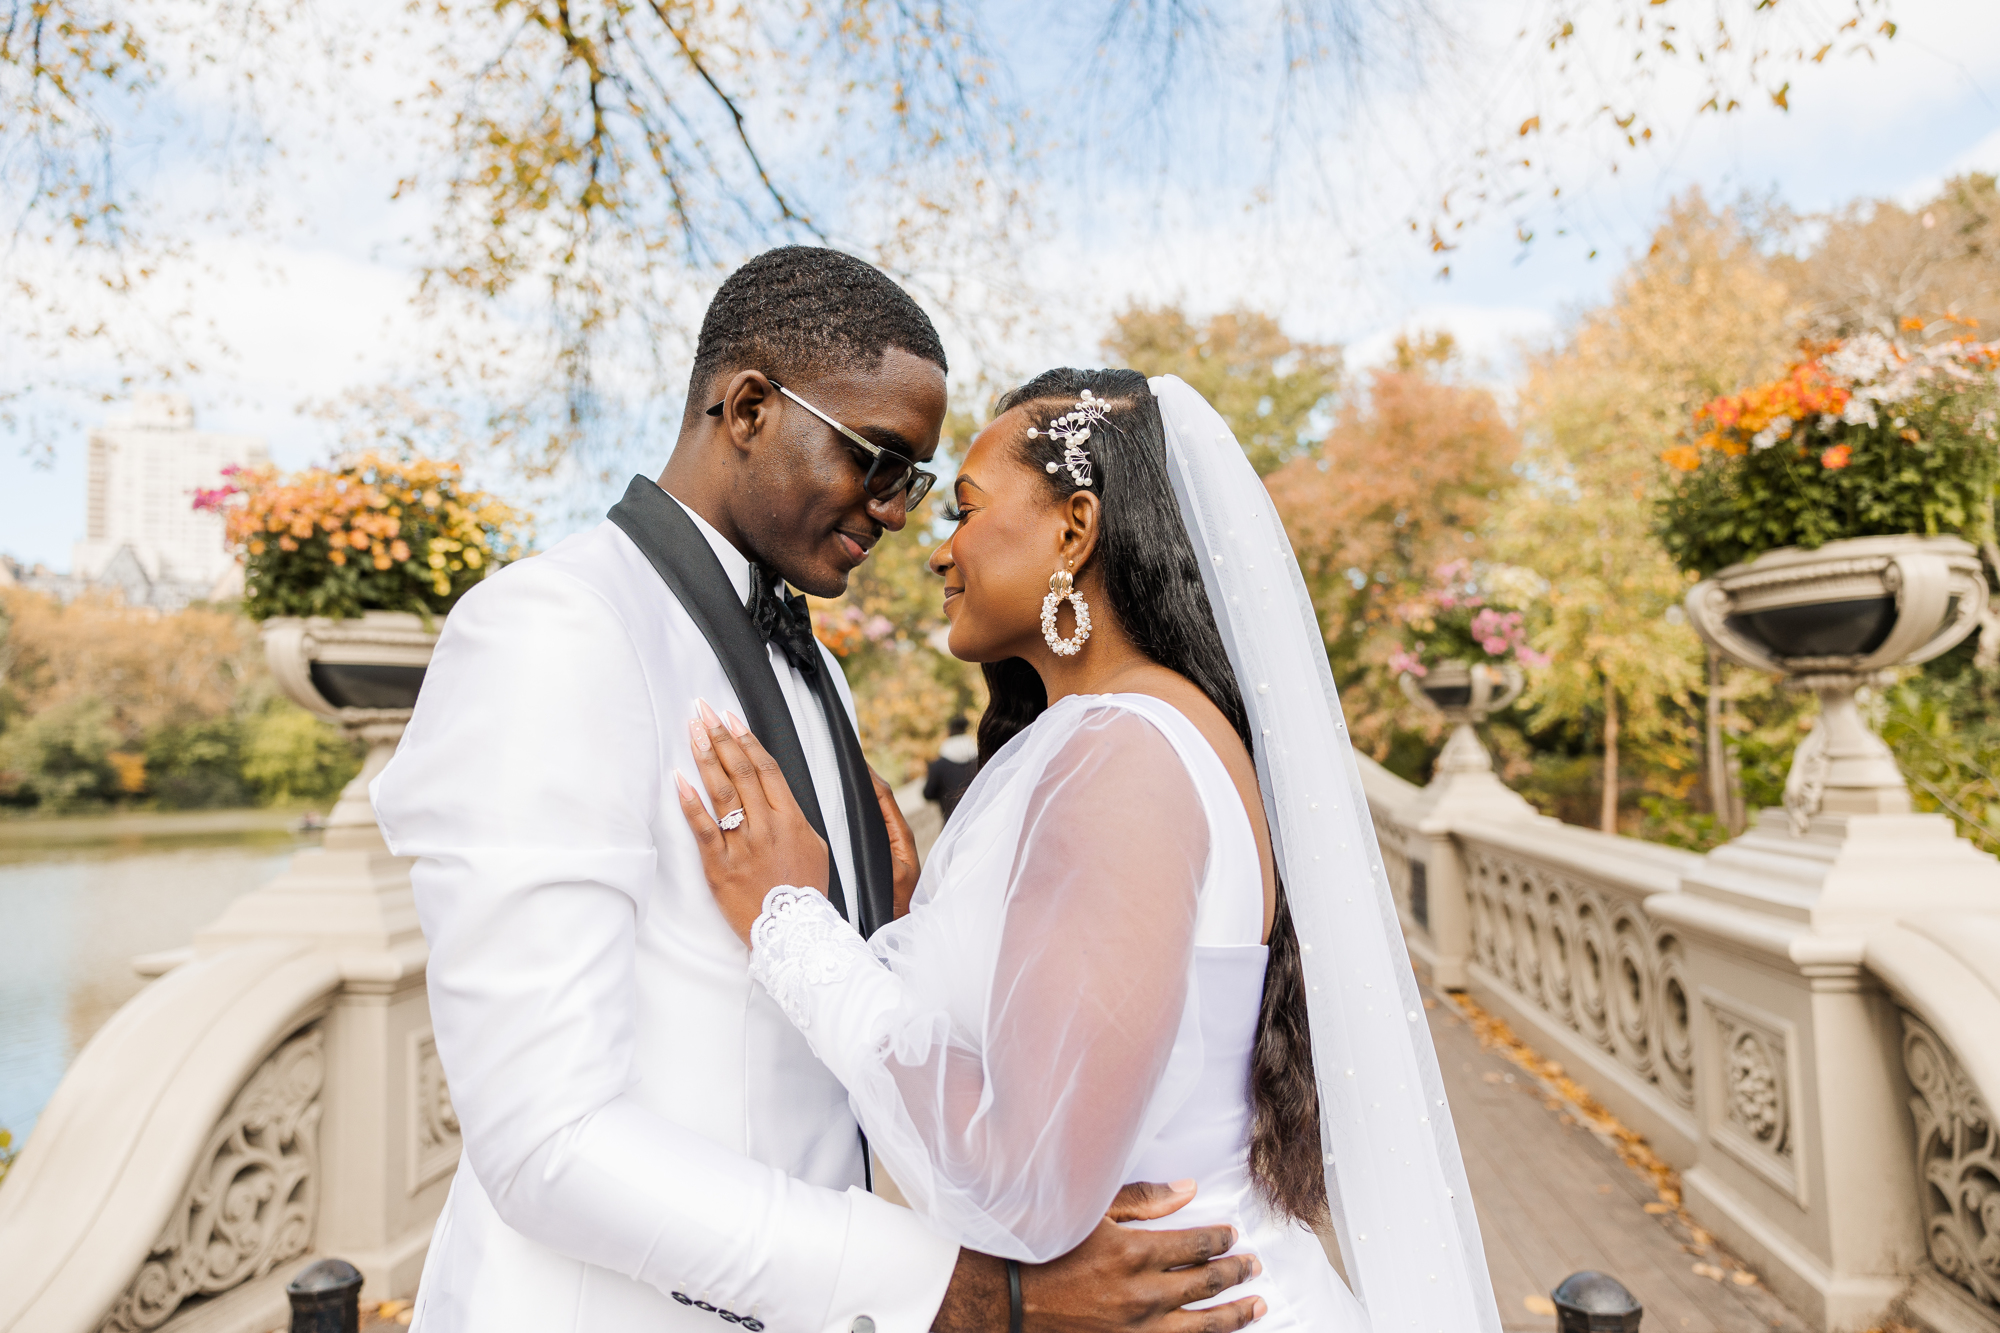 Eye-catching Central Park Wedding Photos on Cherry Hill in Fall